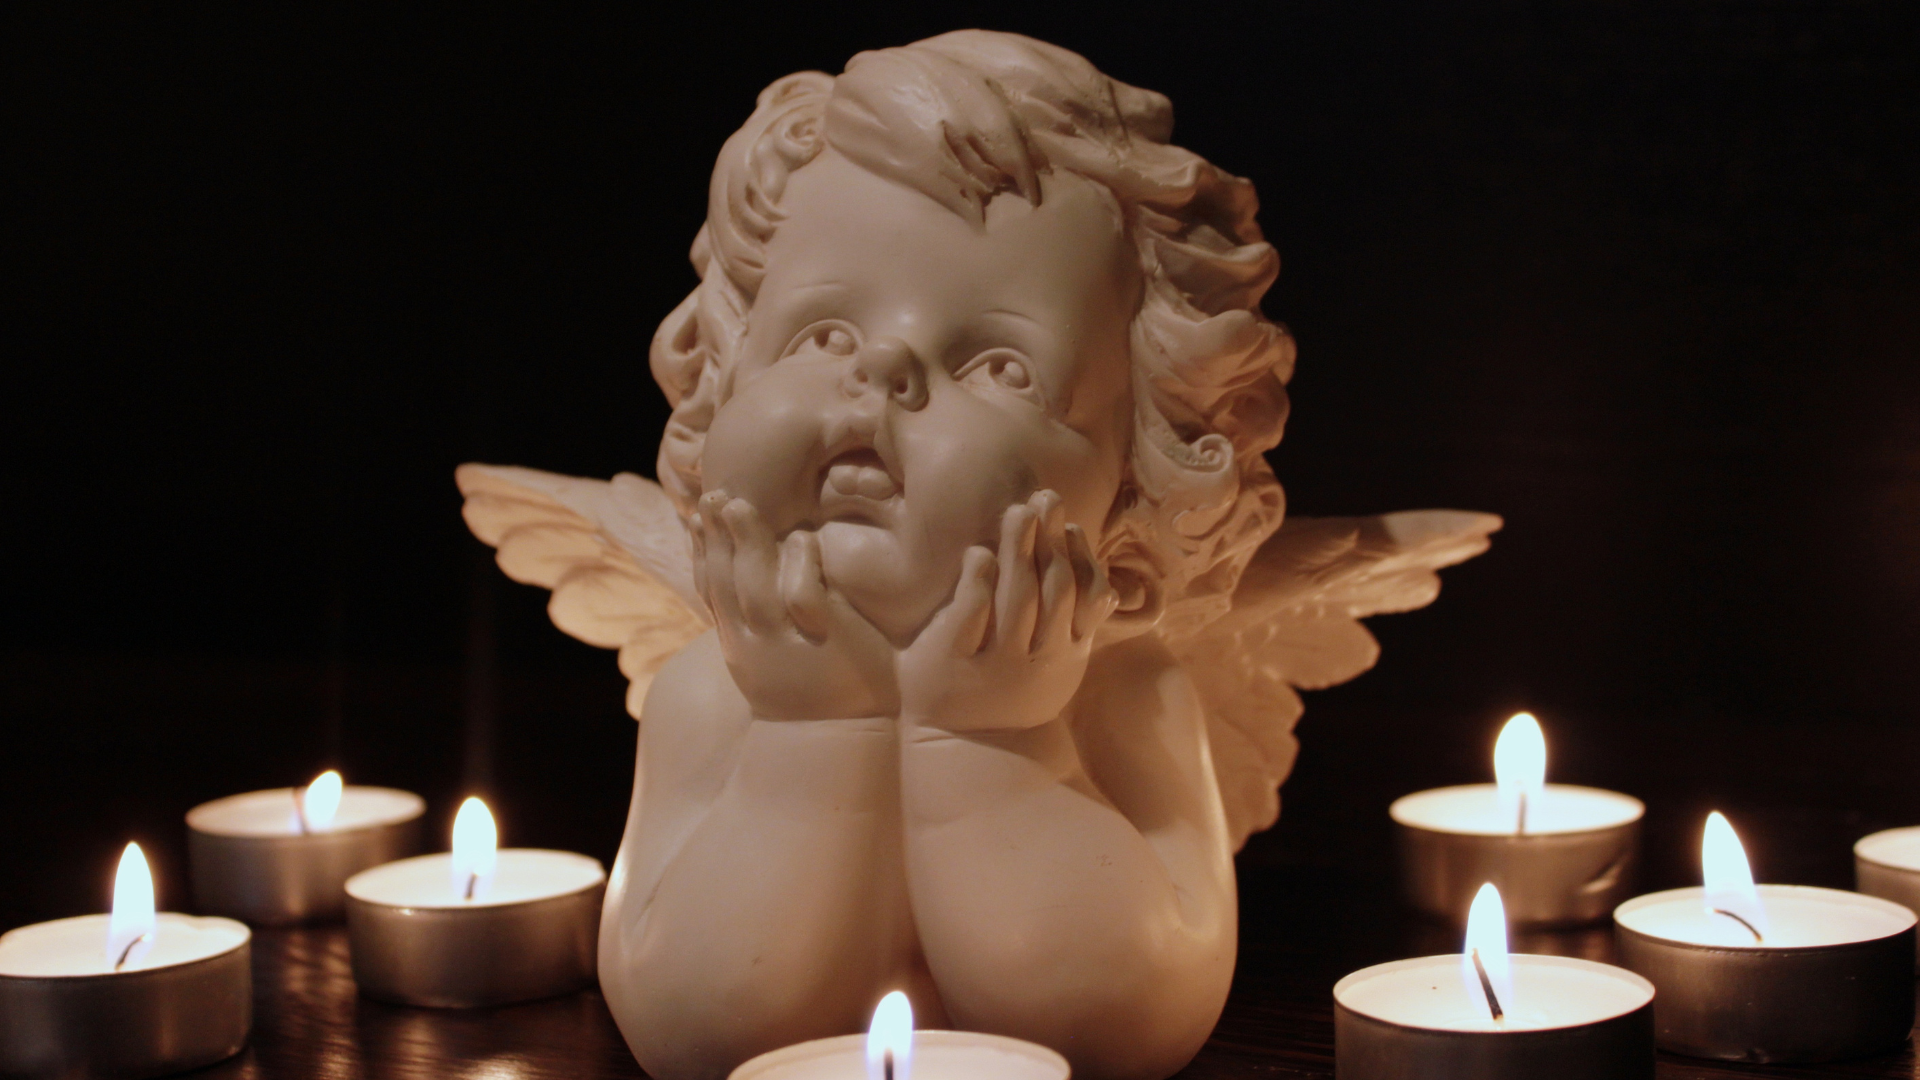 A cute angel figurine with candles around it